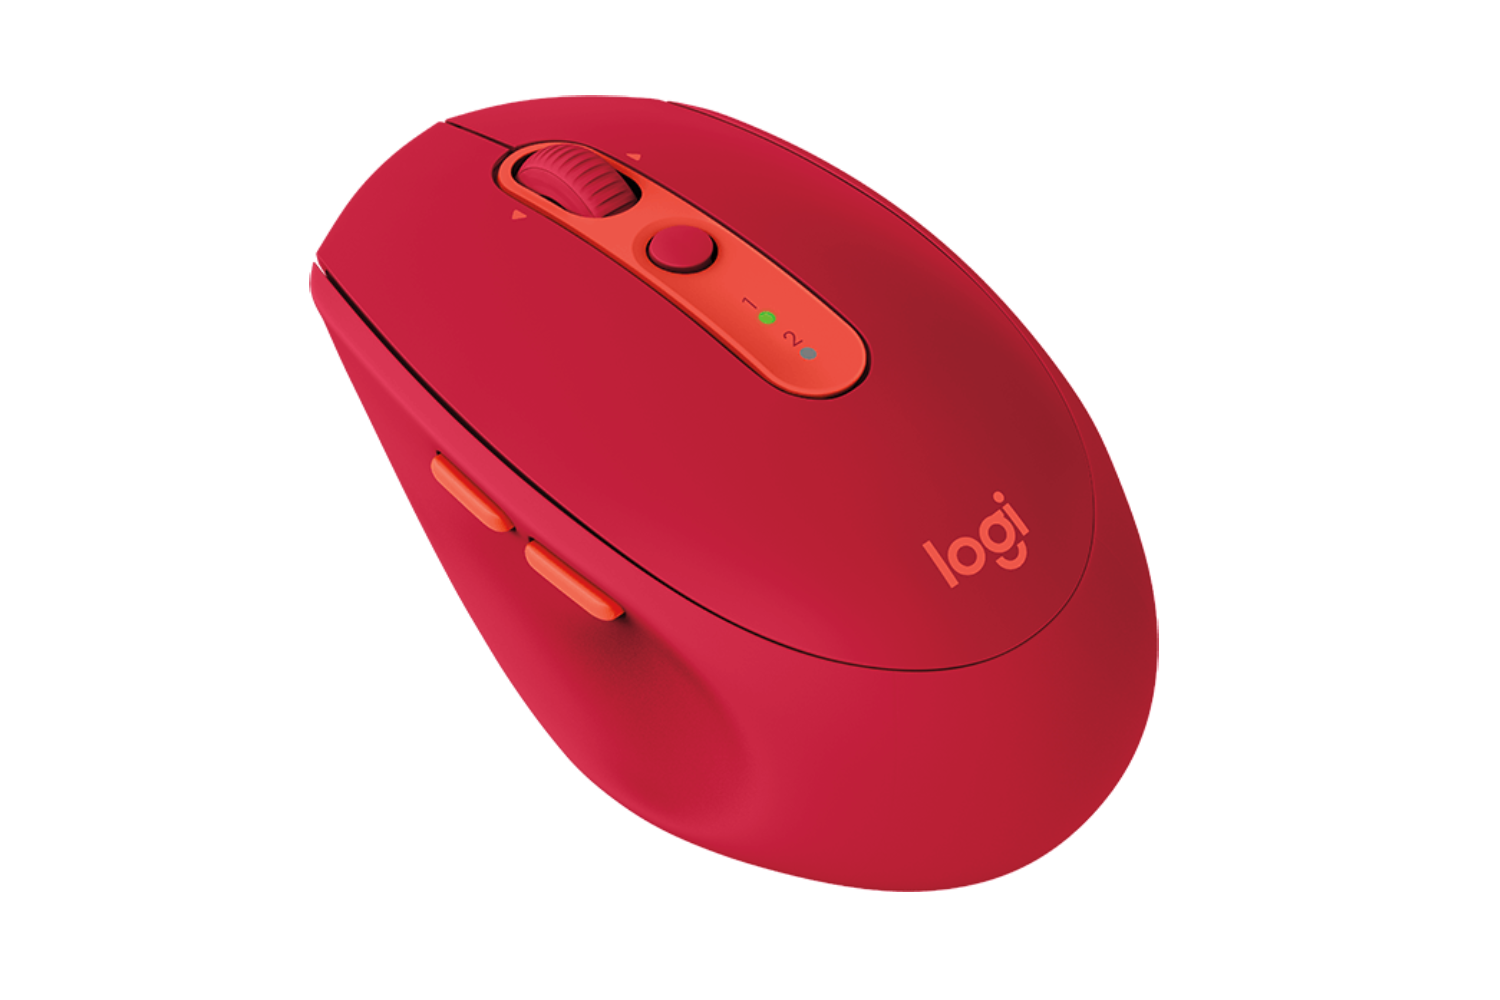 Logitech M590 Multi-Devices Wireless Silent Mouse Ruby